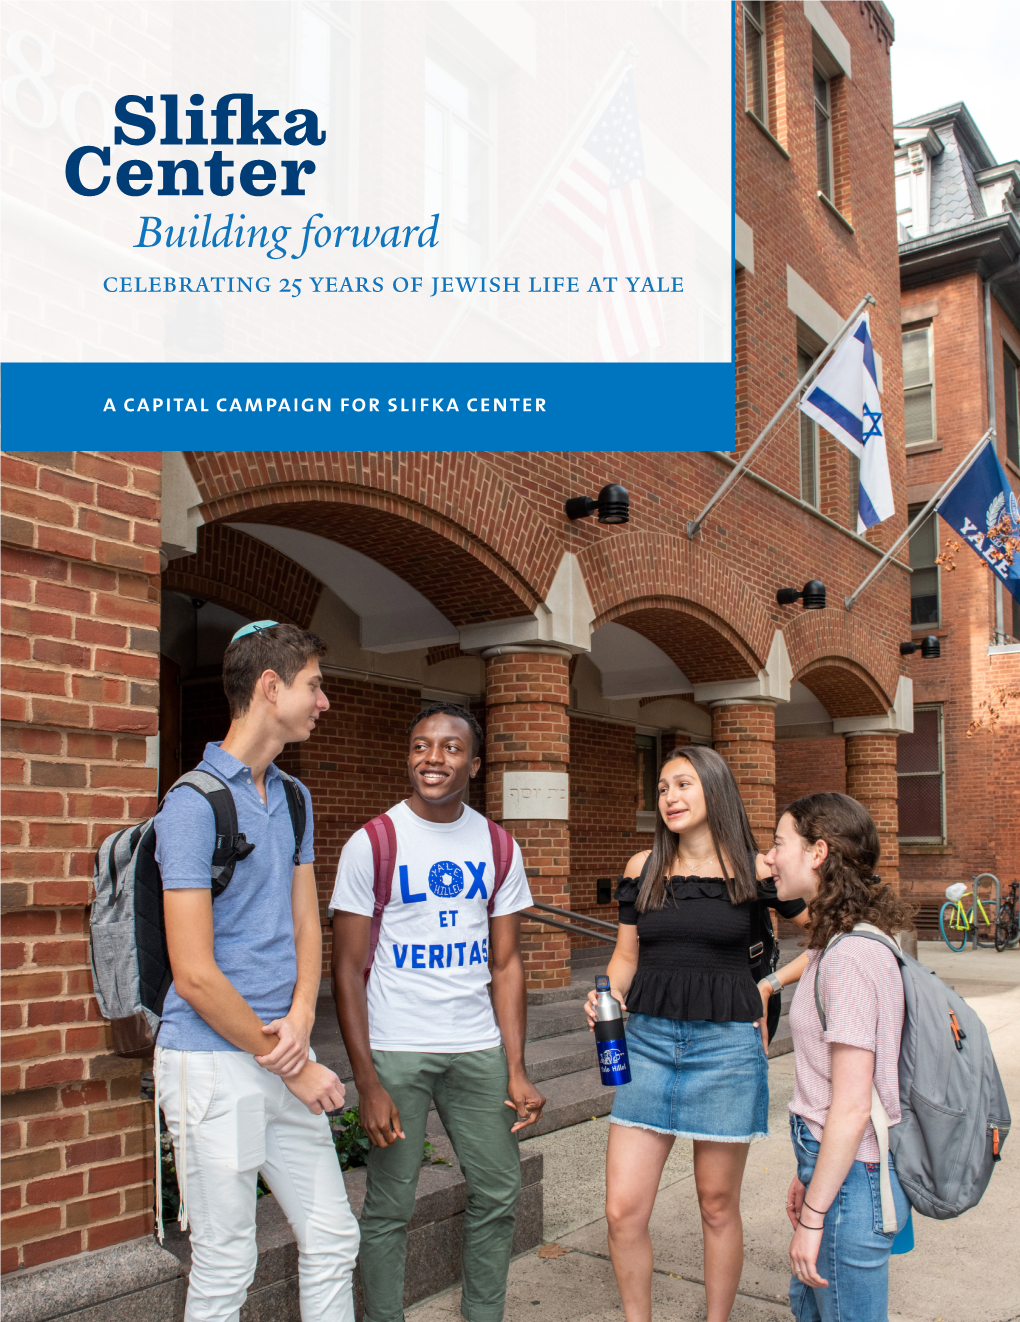 A Capital Campaign for Slifka Center “Joseph Slifka Center for Jewish Life Is a Vibrant Community Space at Yale